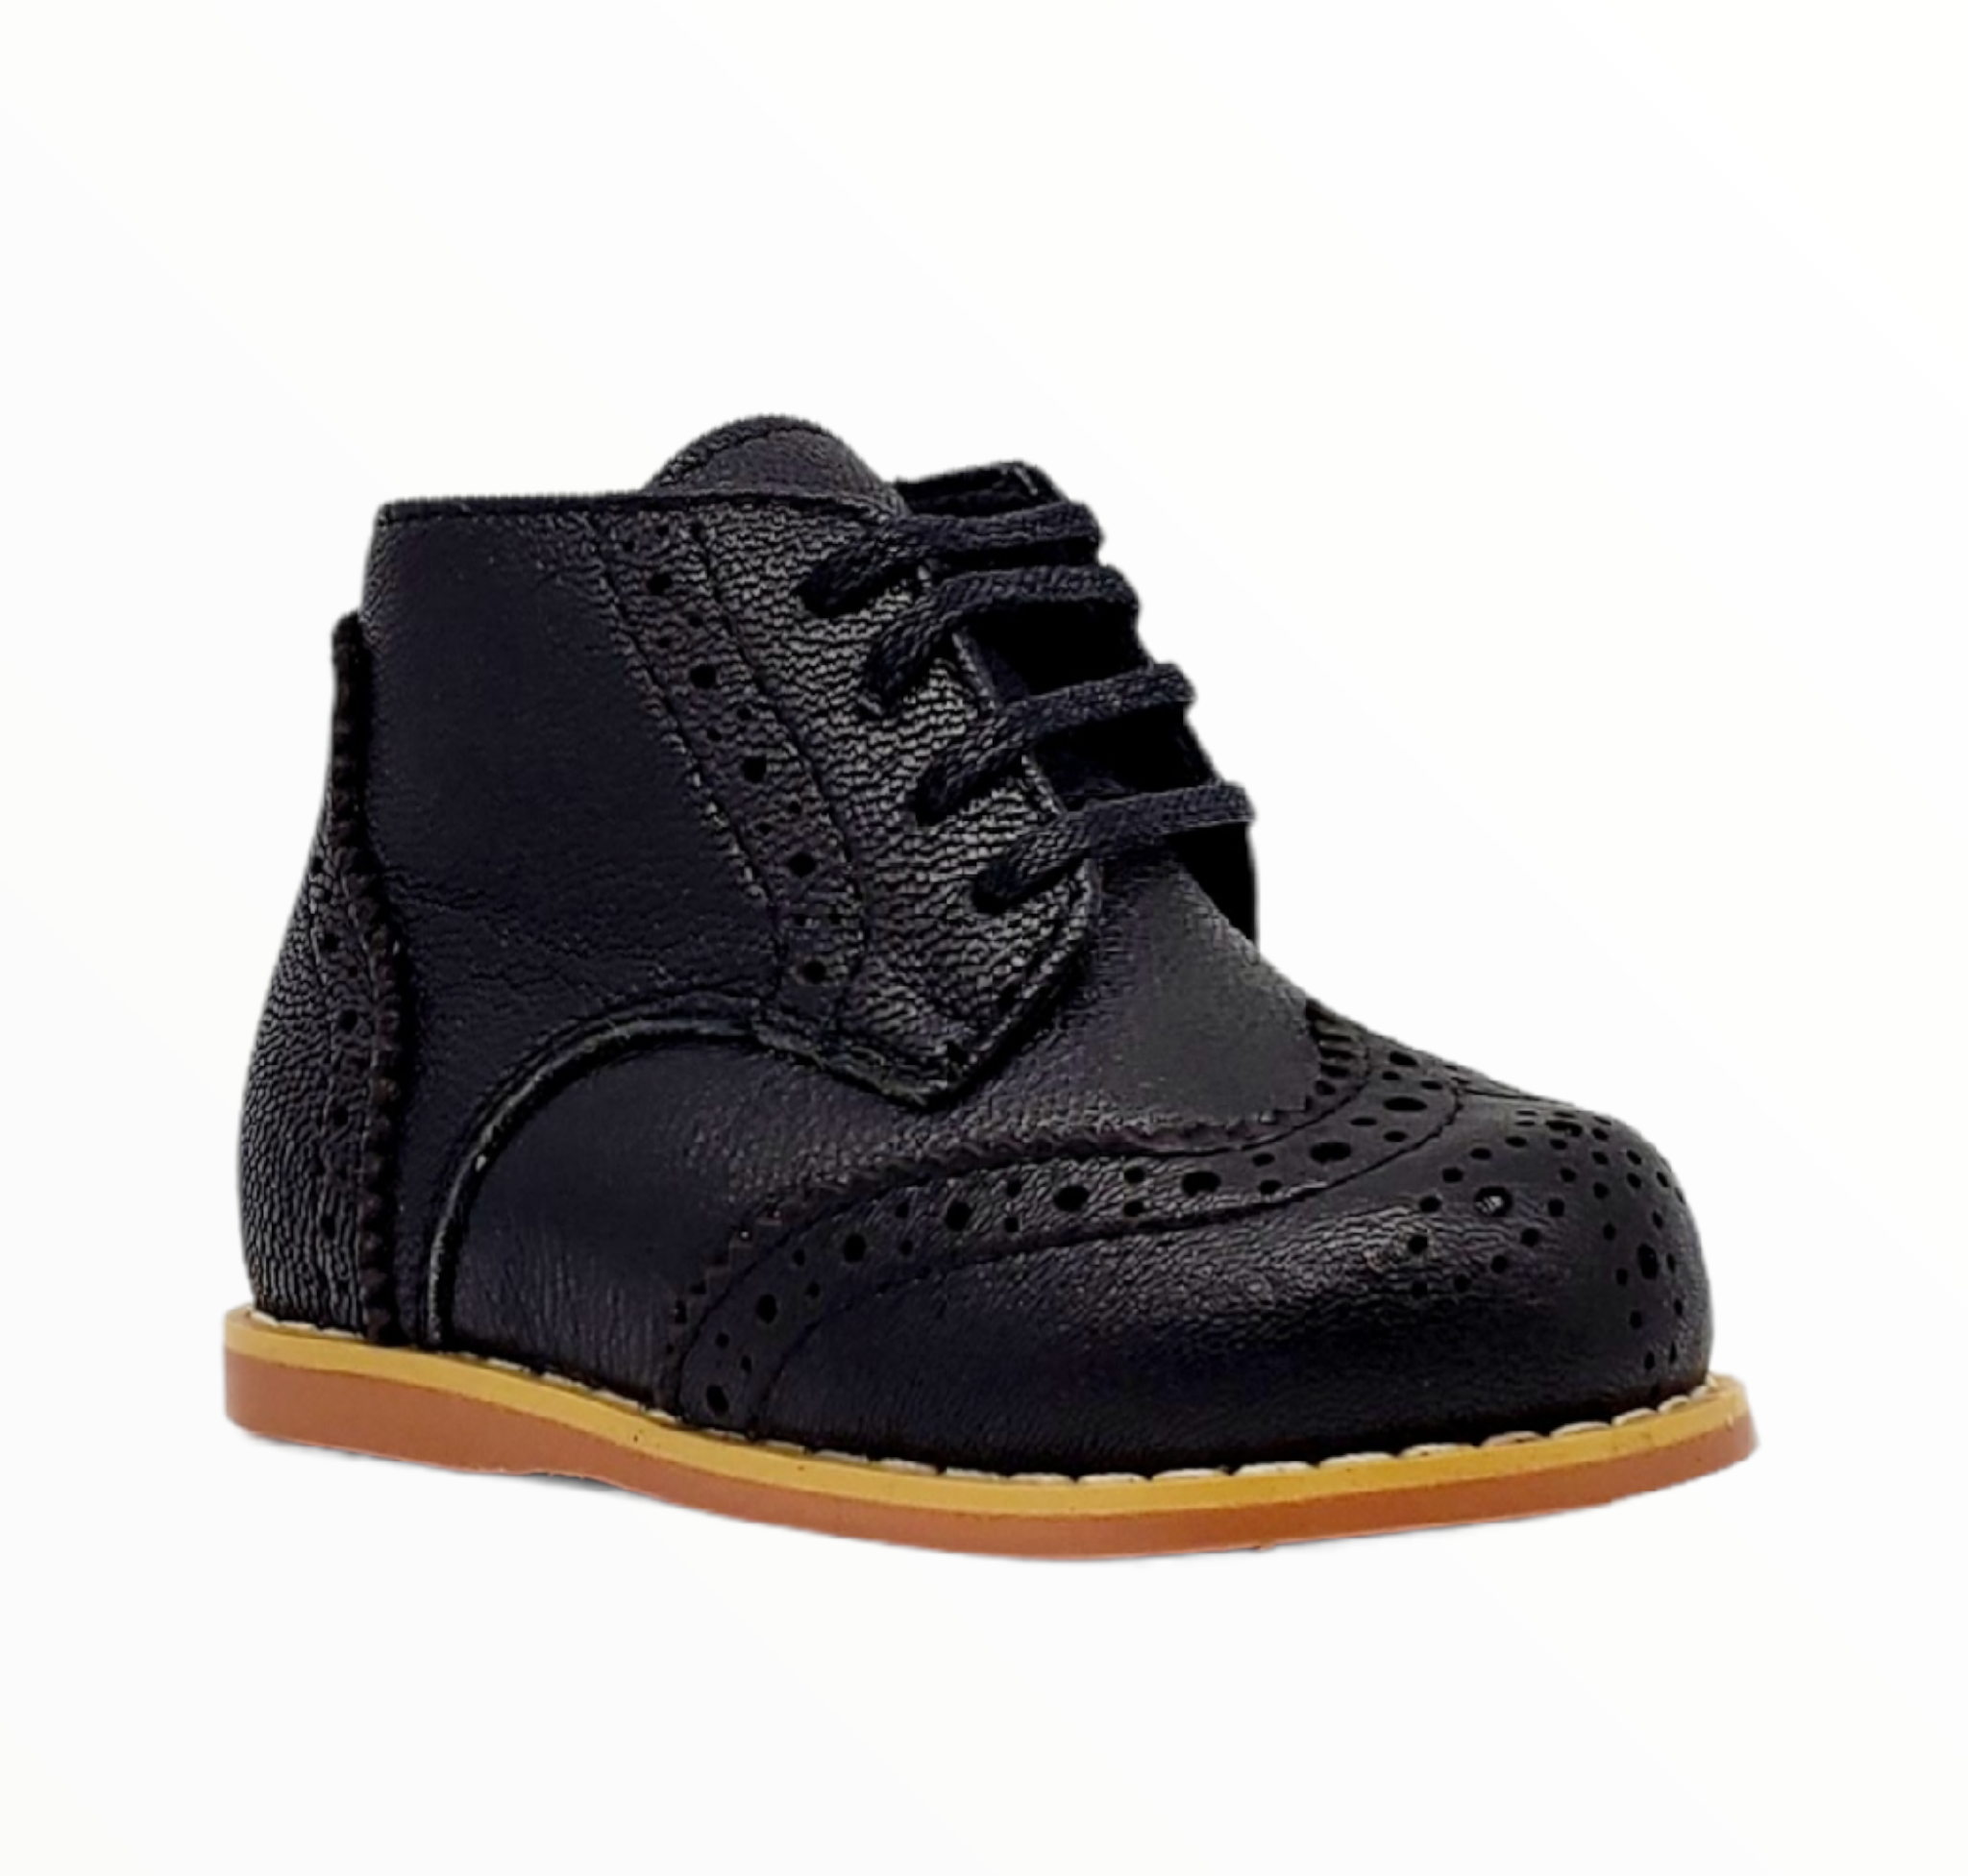 Classic Walkers Oxford - Black - Tippy Tot Shoes